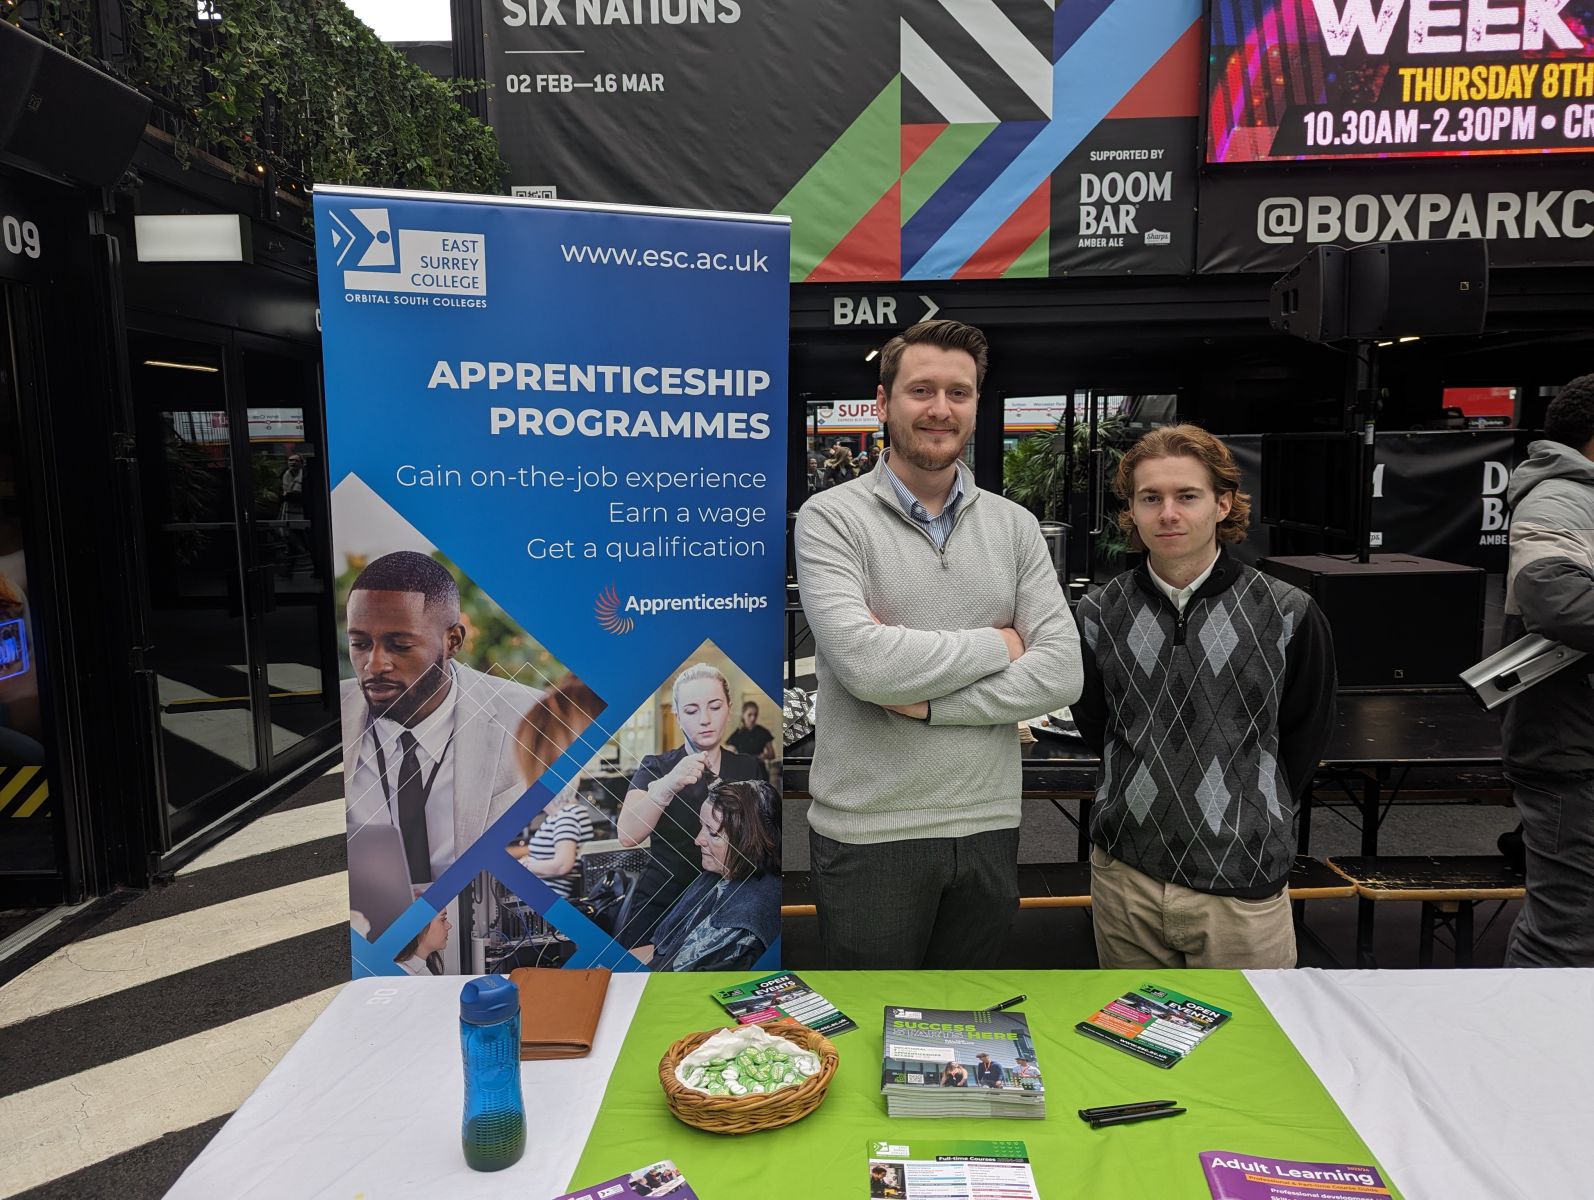 Mark and Nathan standing at a Careers Fair stand